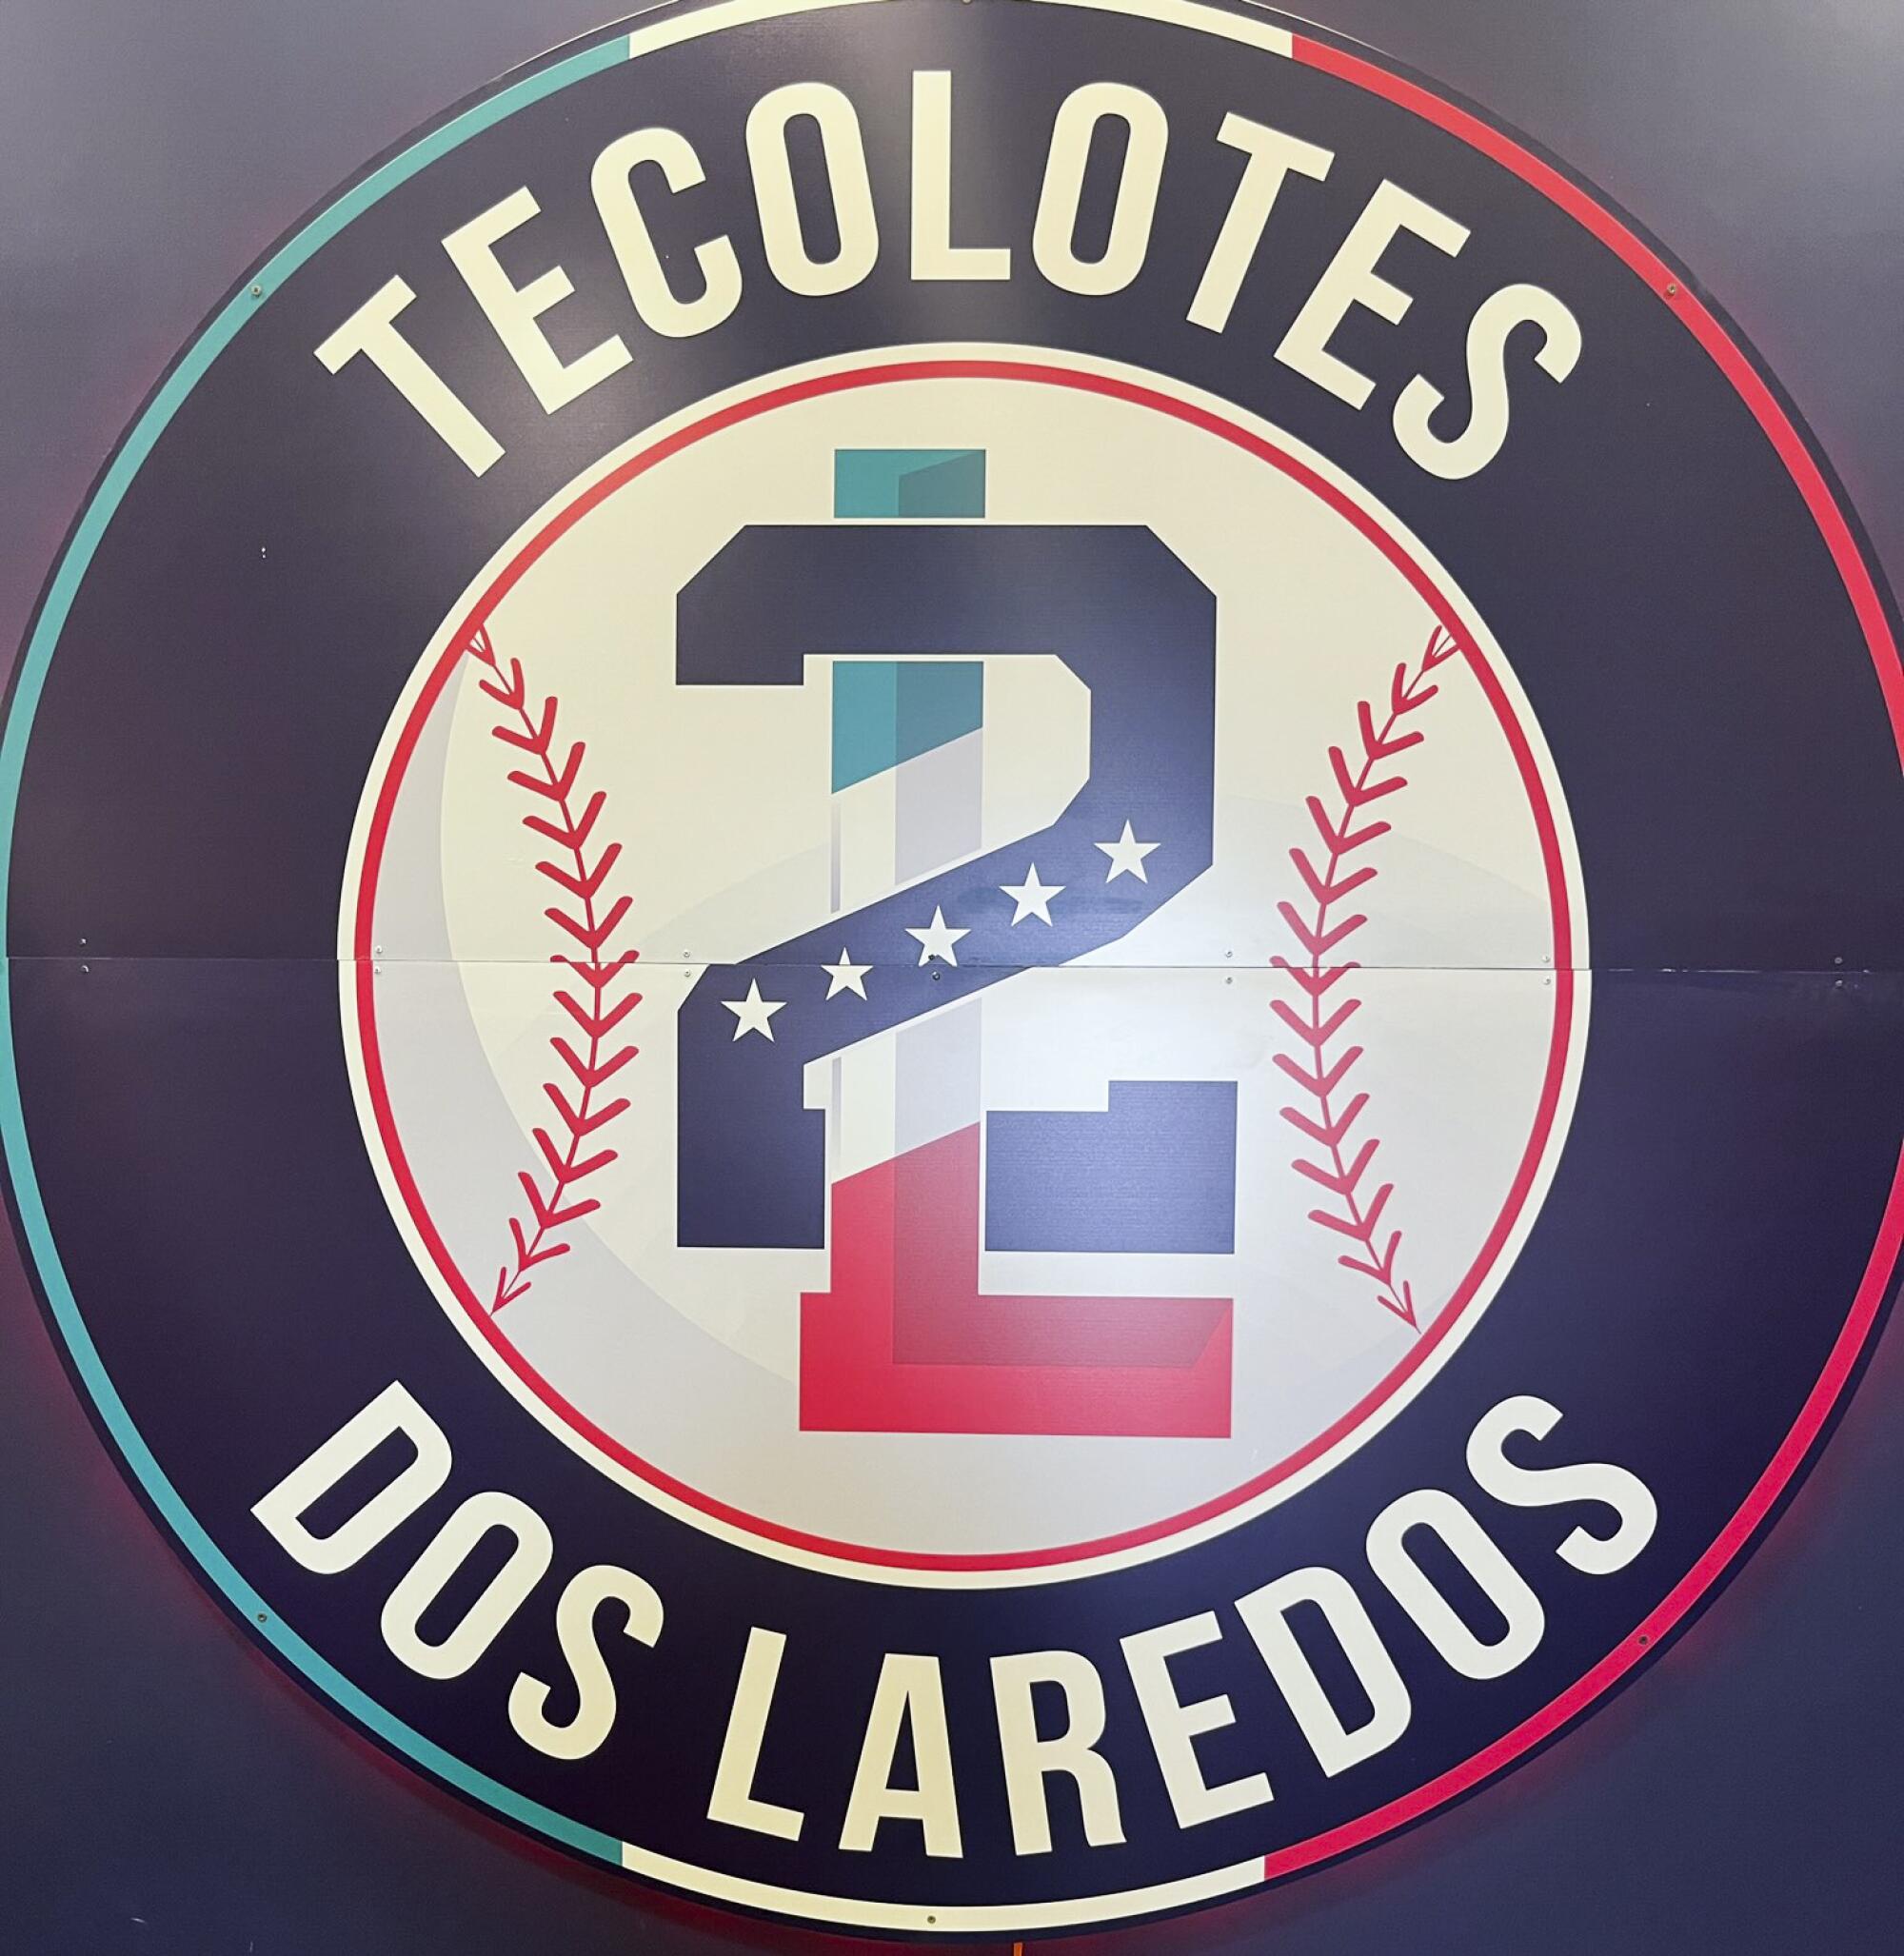 The Tecolotes logo features colors of both the Mexican and U.S. flags with an interlocking "2" and an "L."